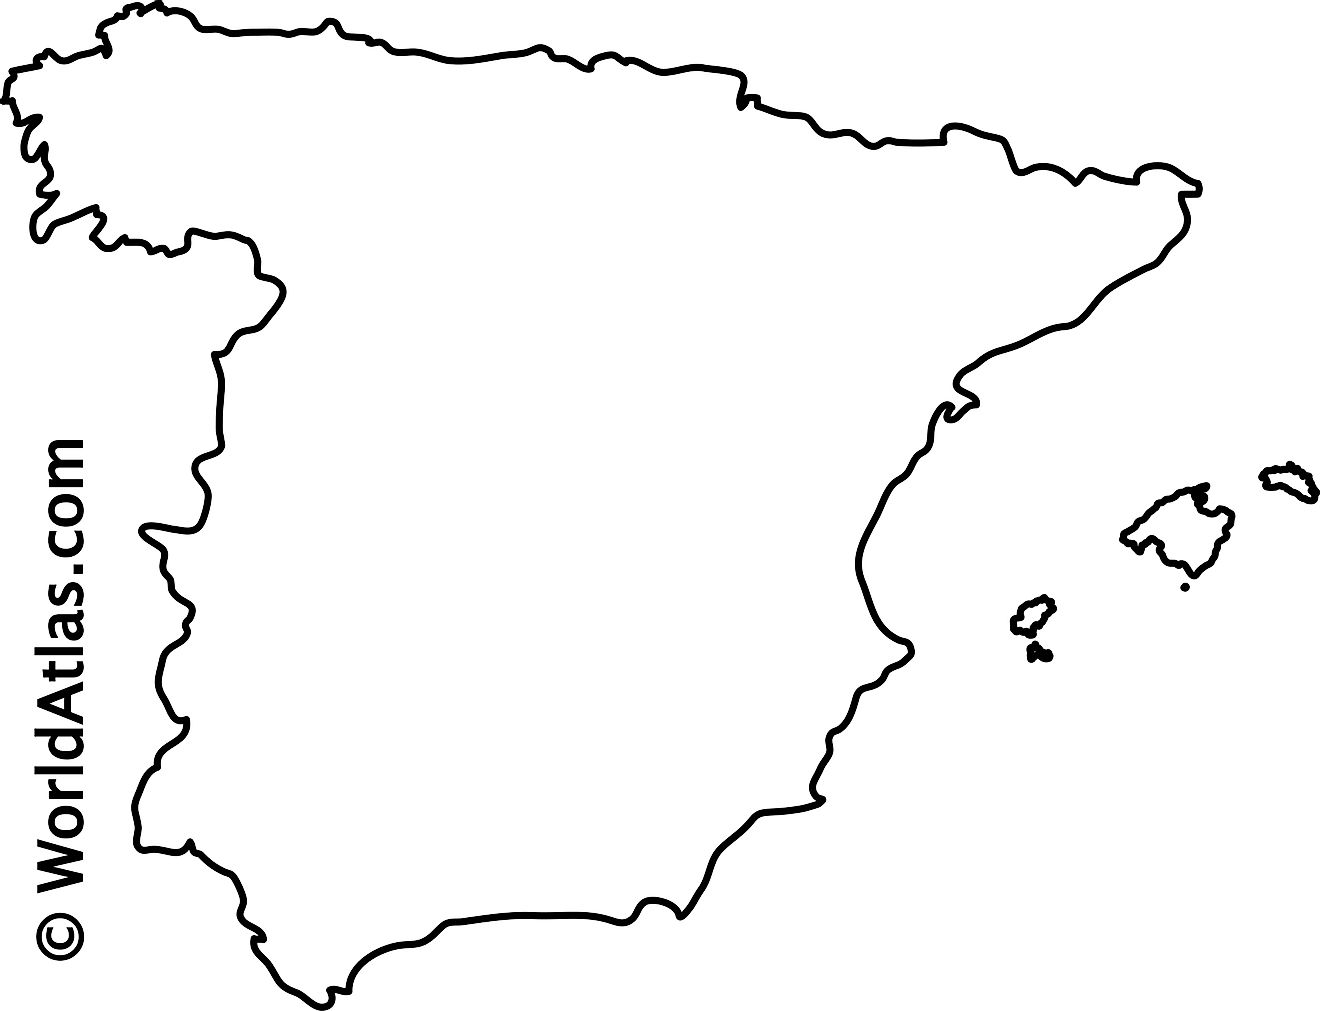 Blank Outline Map of Spain